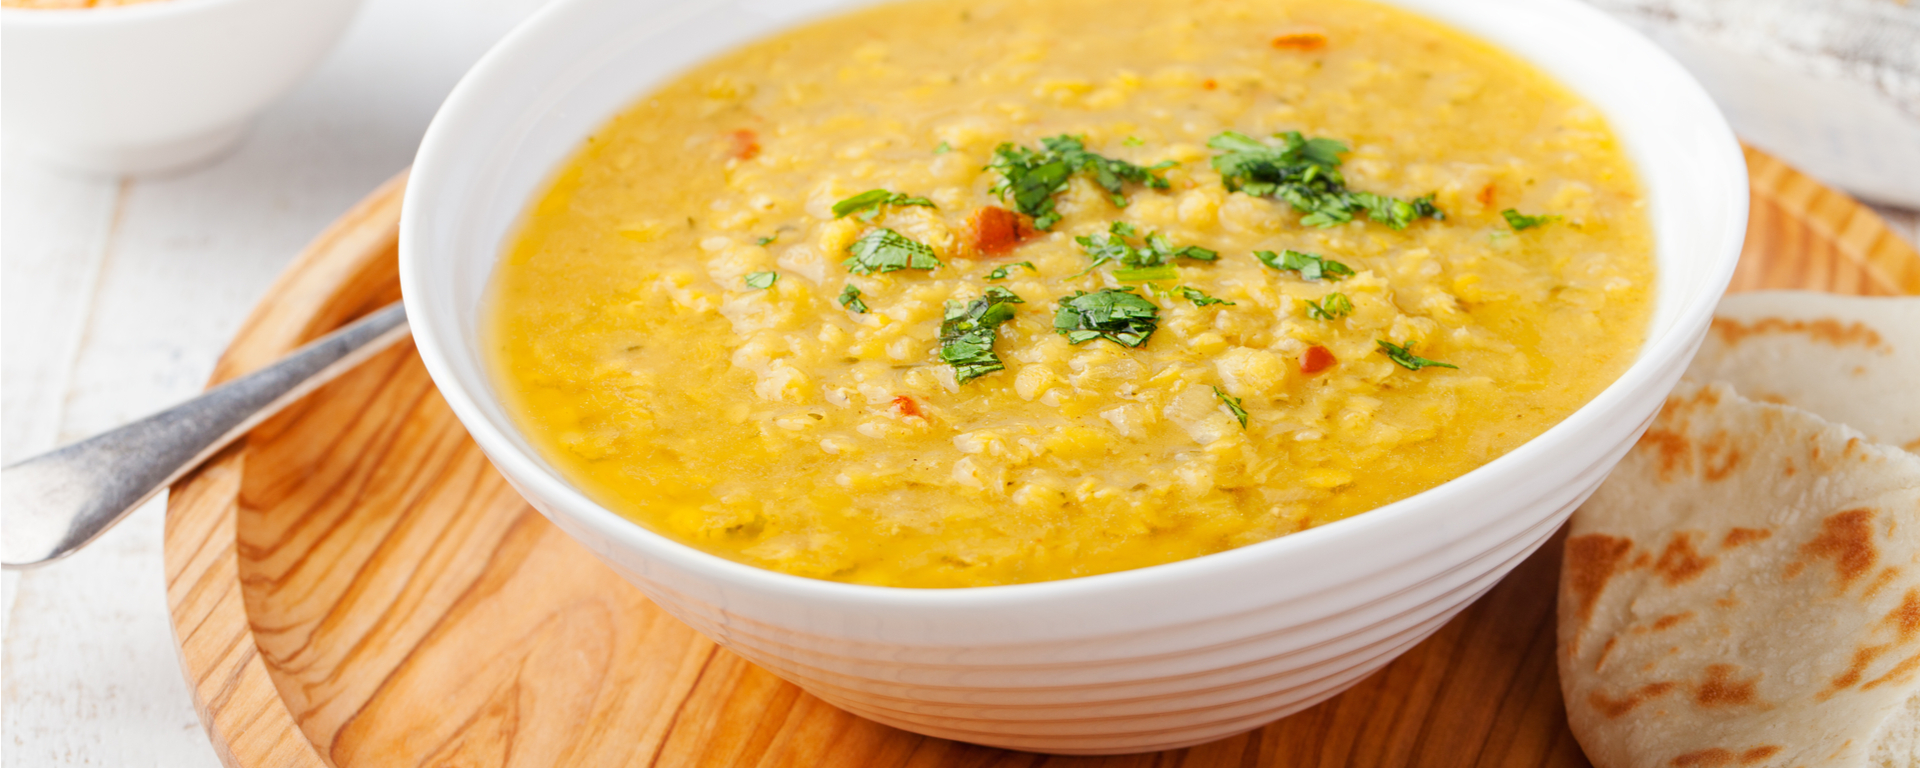 Photo for - Curried Lentil Soup with Havarti